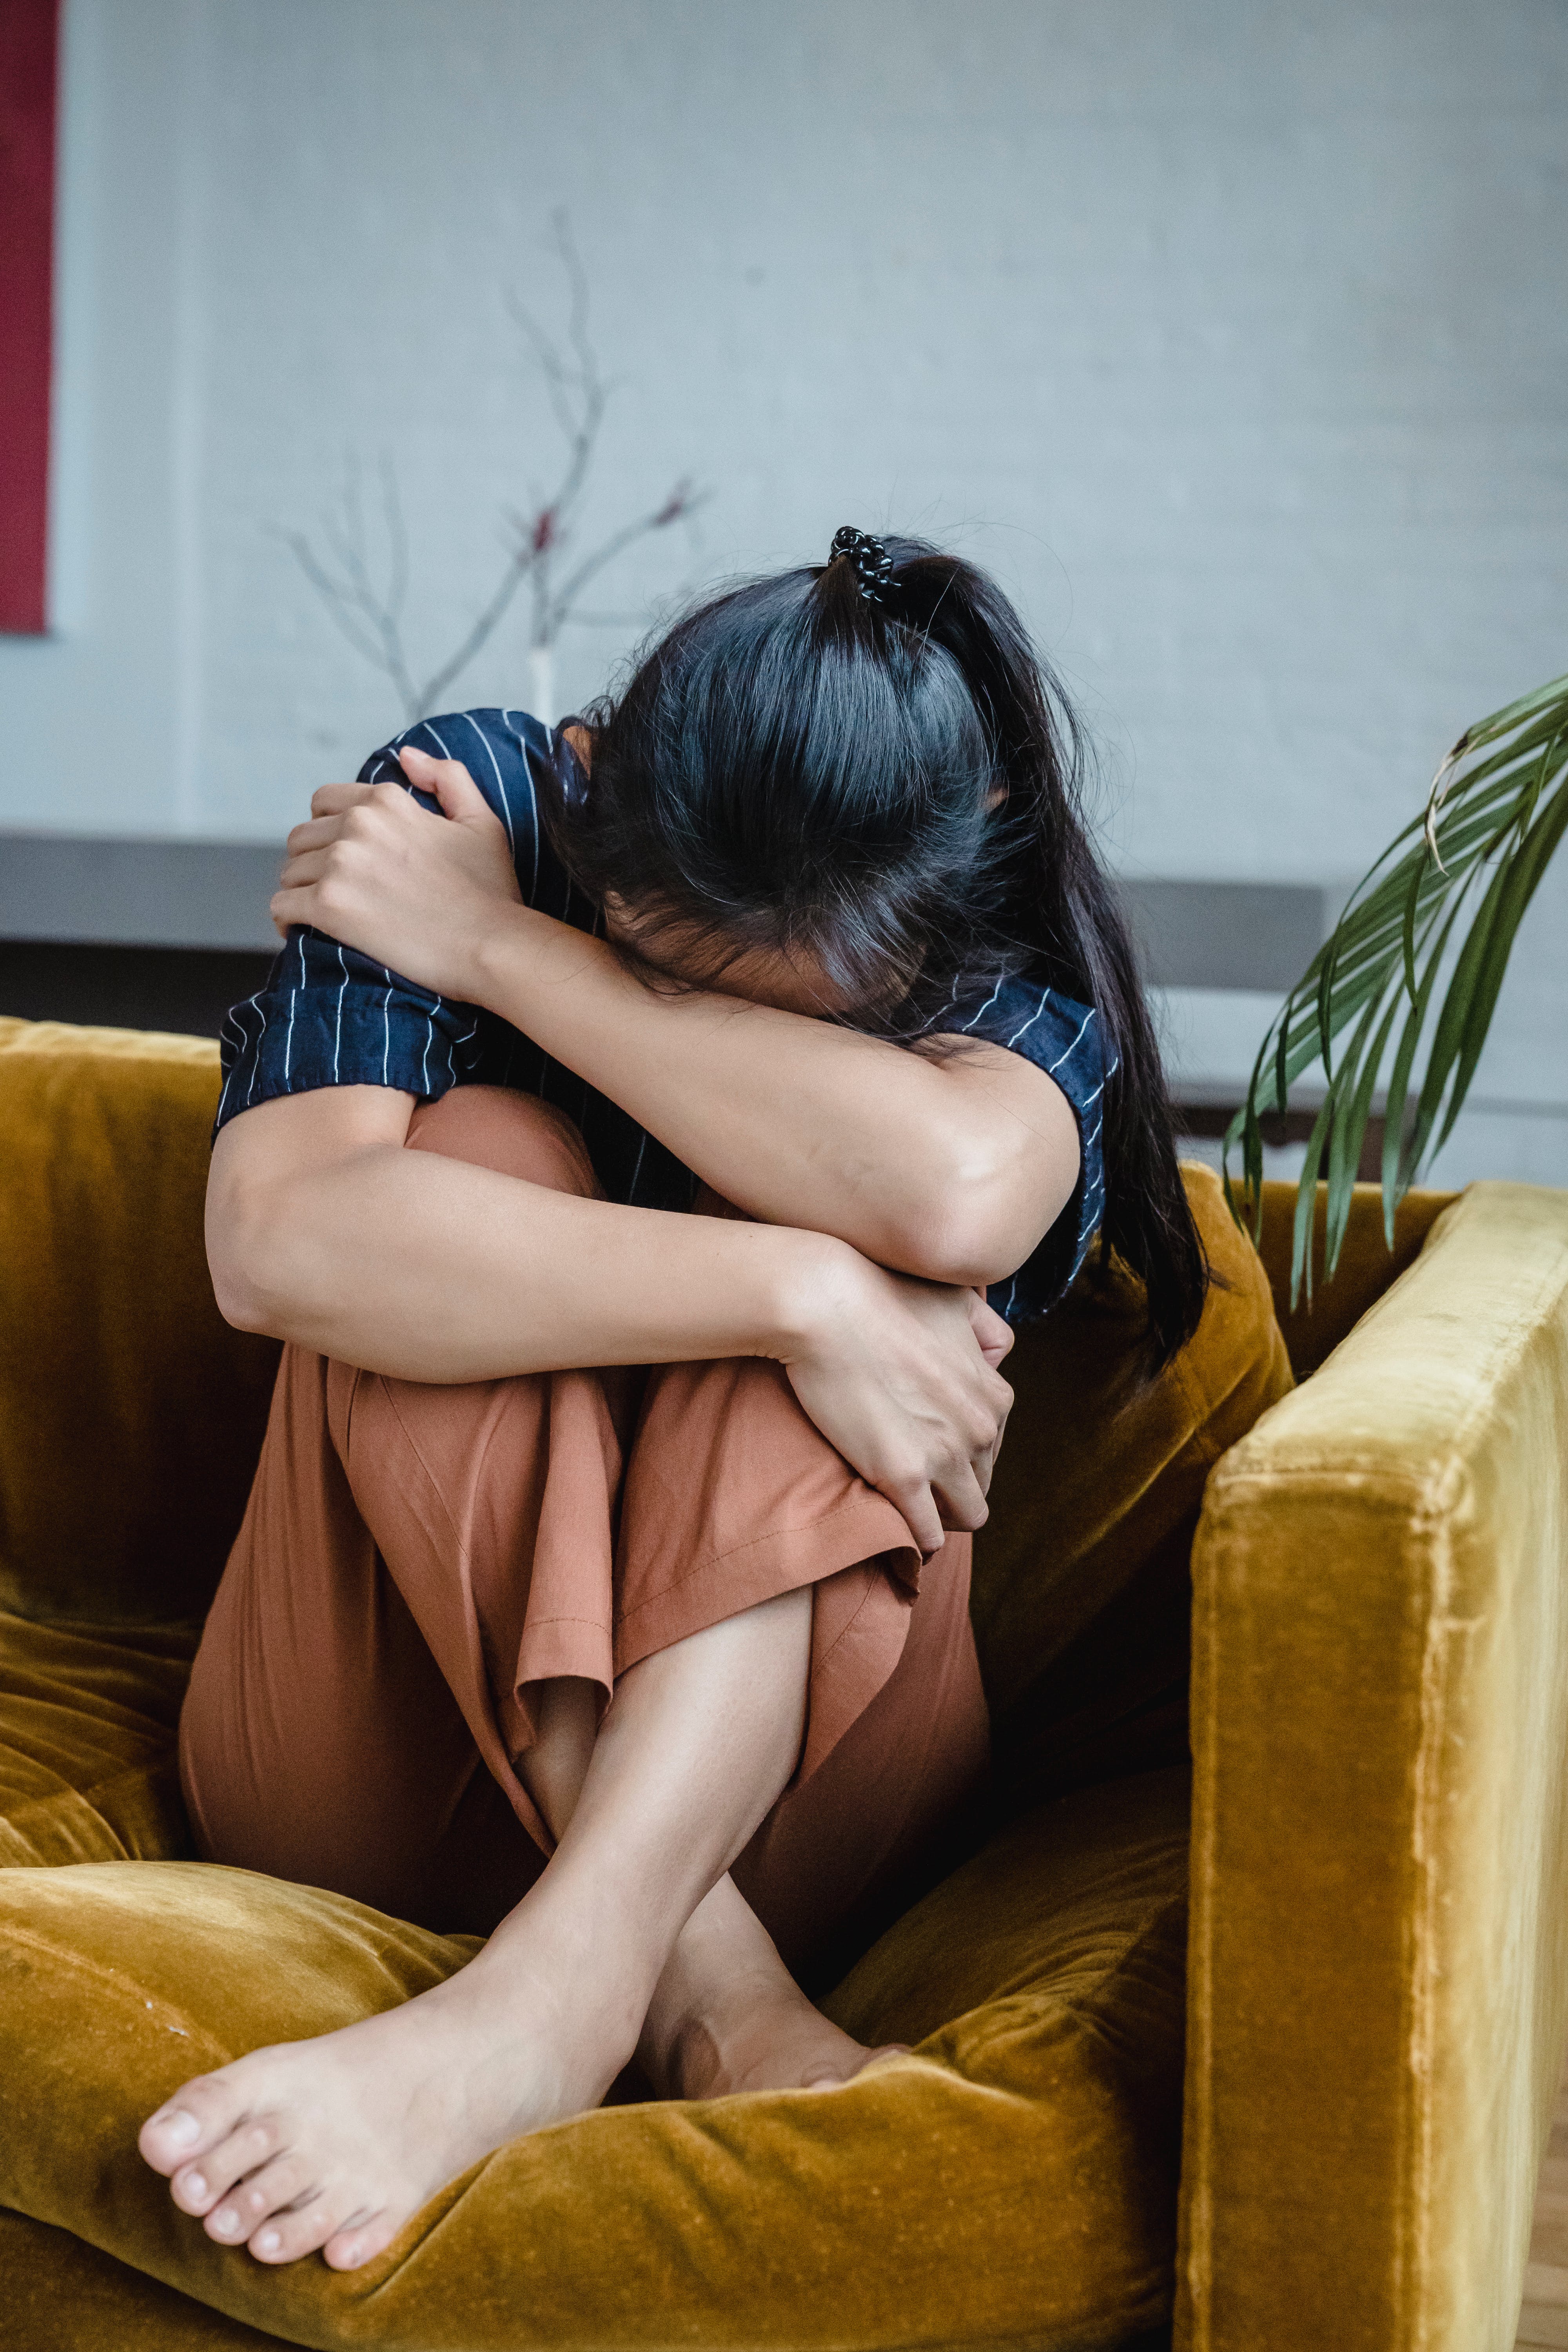 A woman curled up while crying on the couch | Source: Pexels